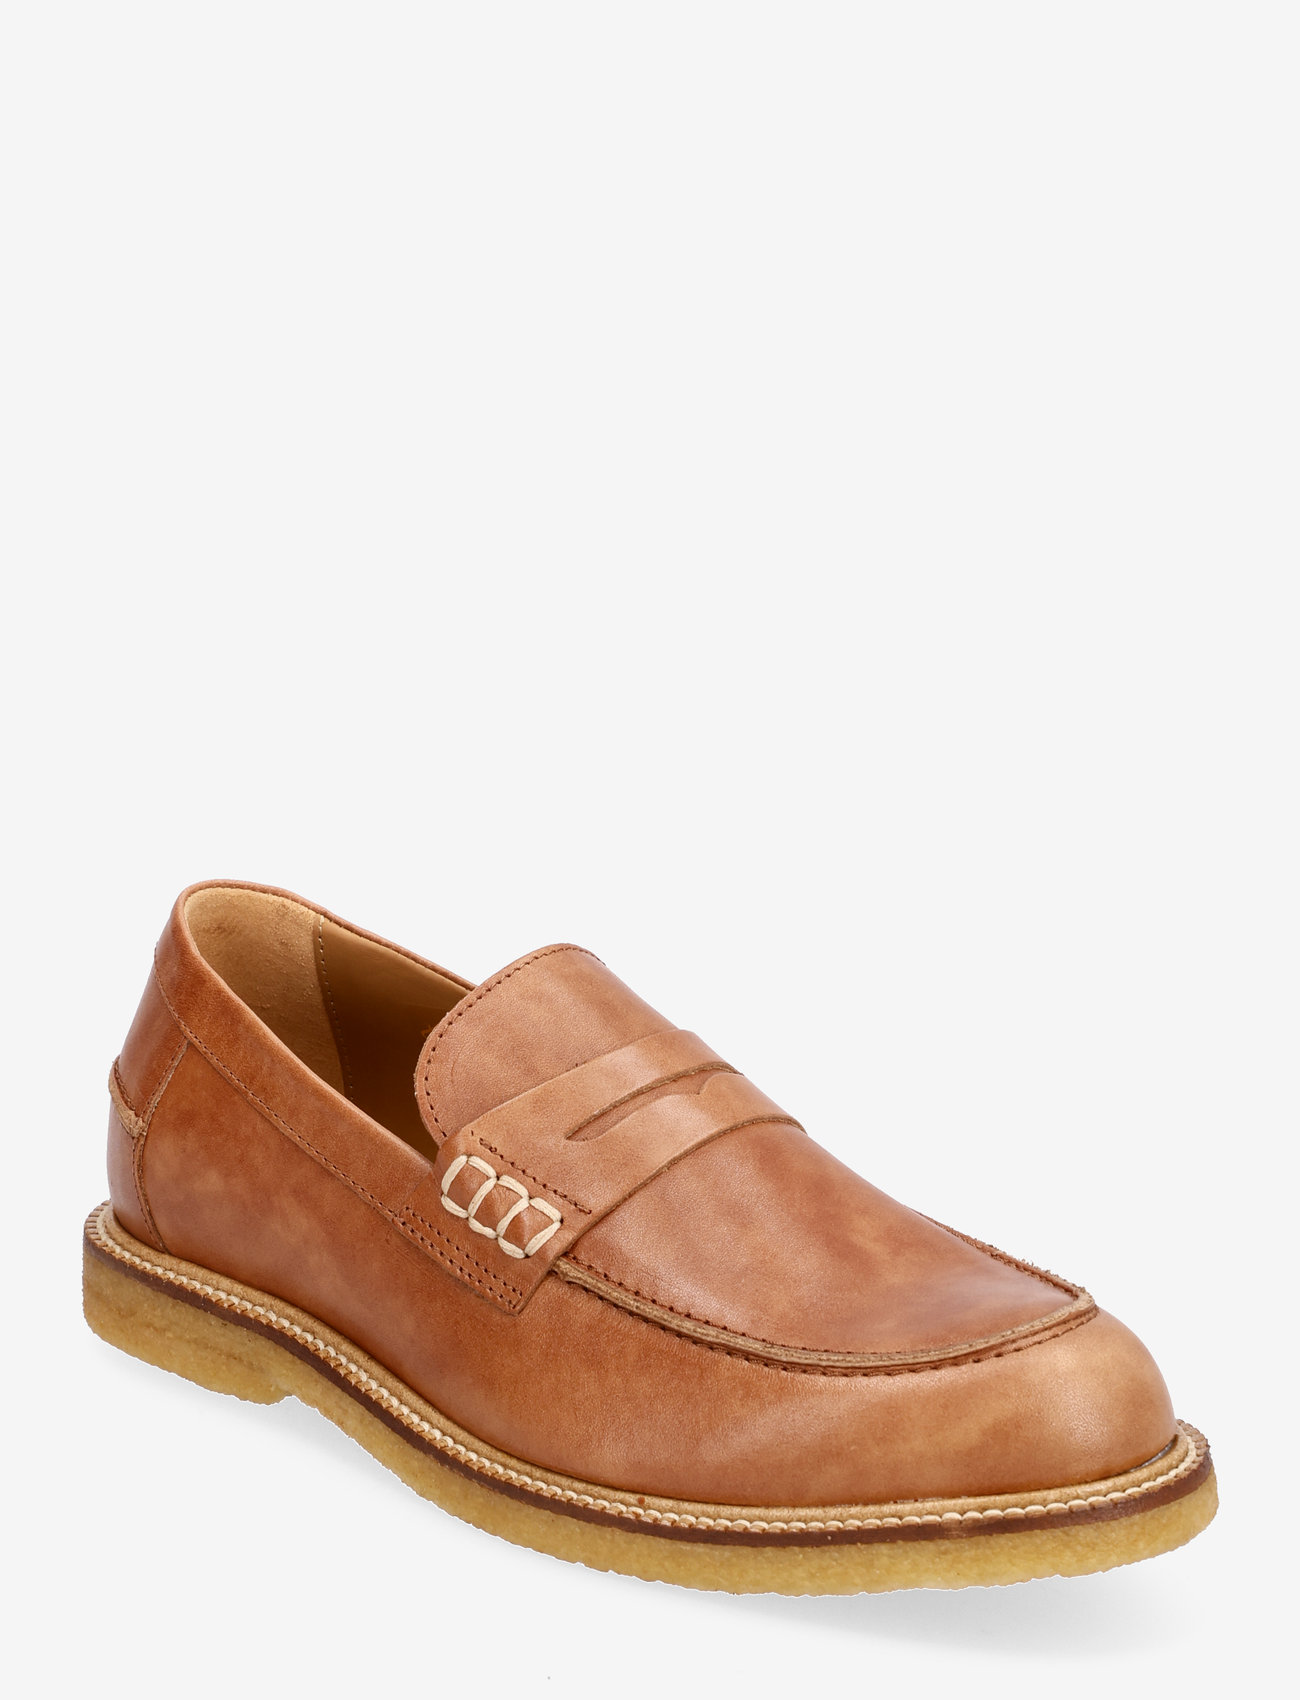 ANGULUS - Loafer - nordic style - 1789 tan - 1